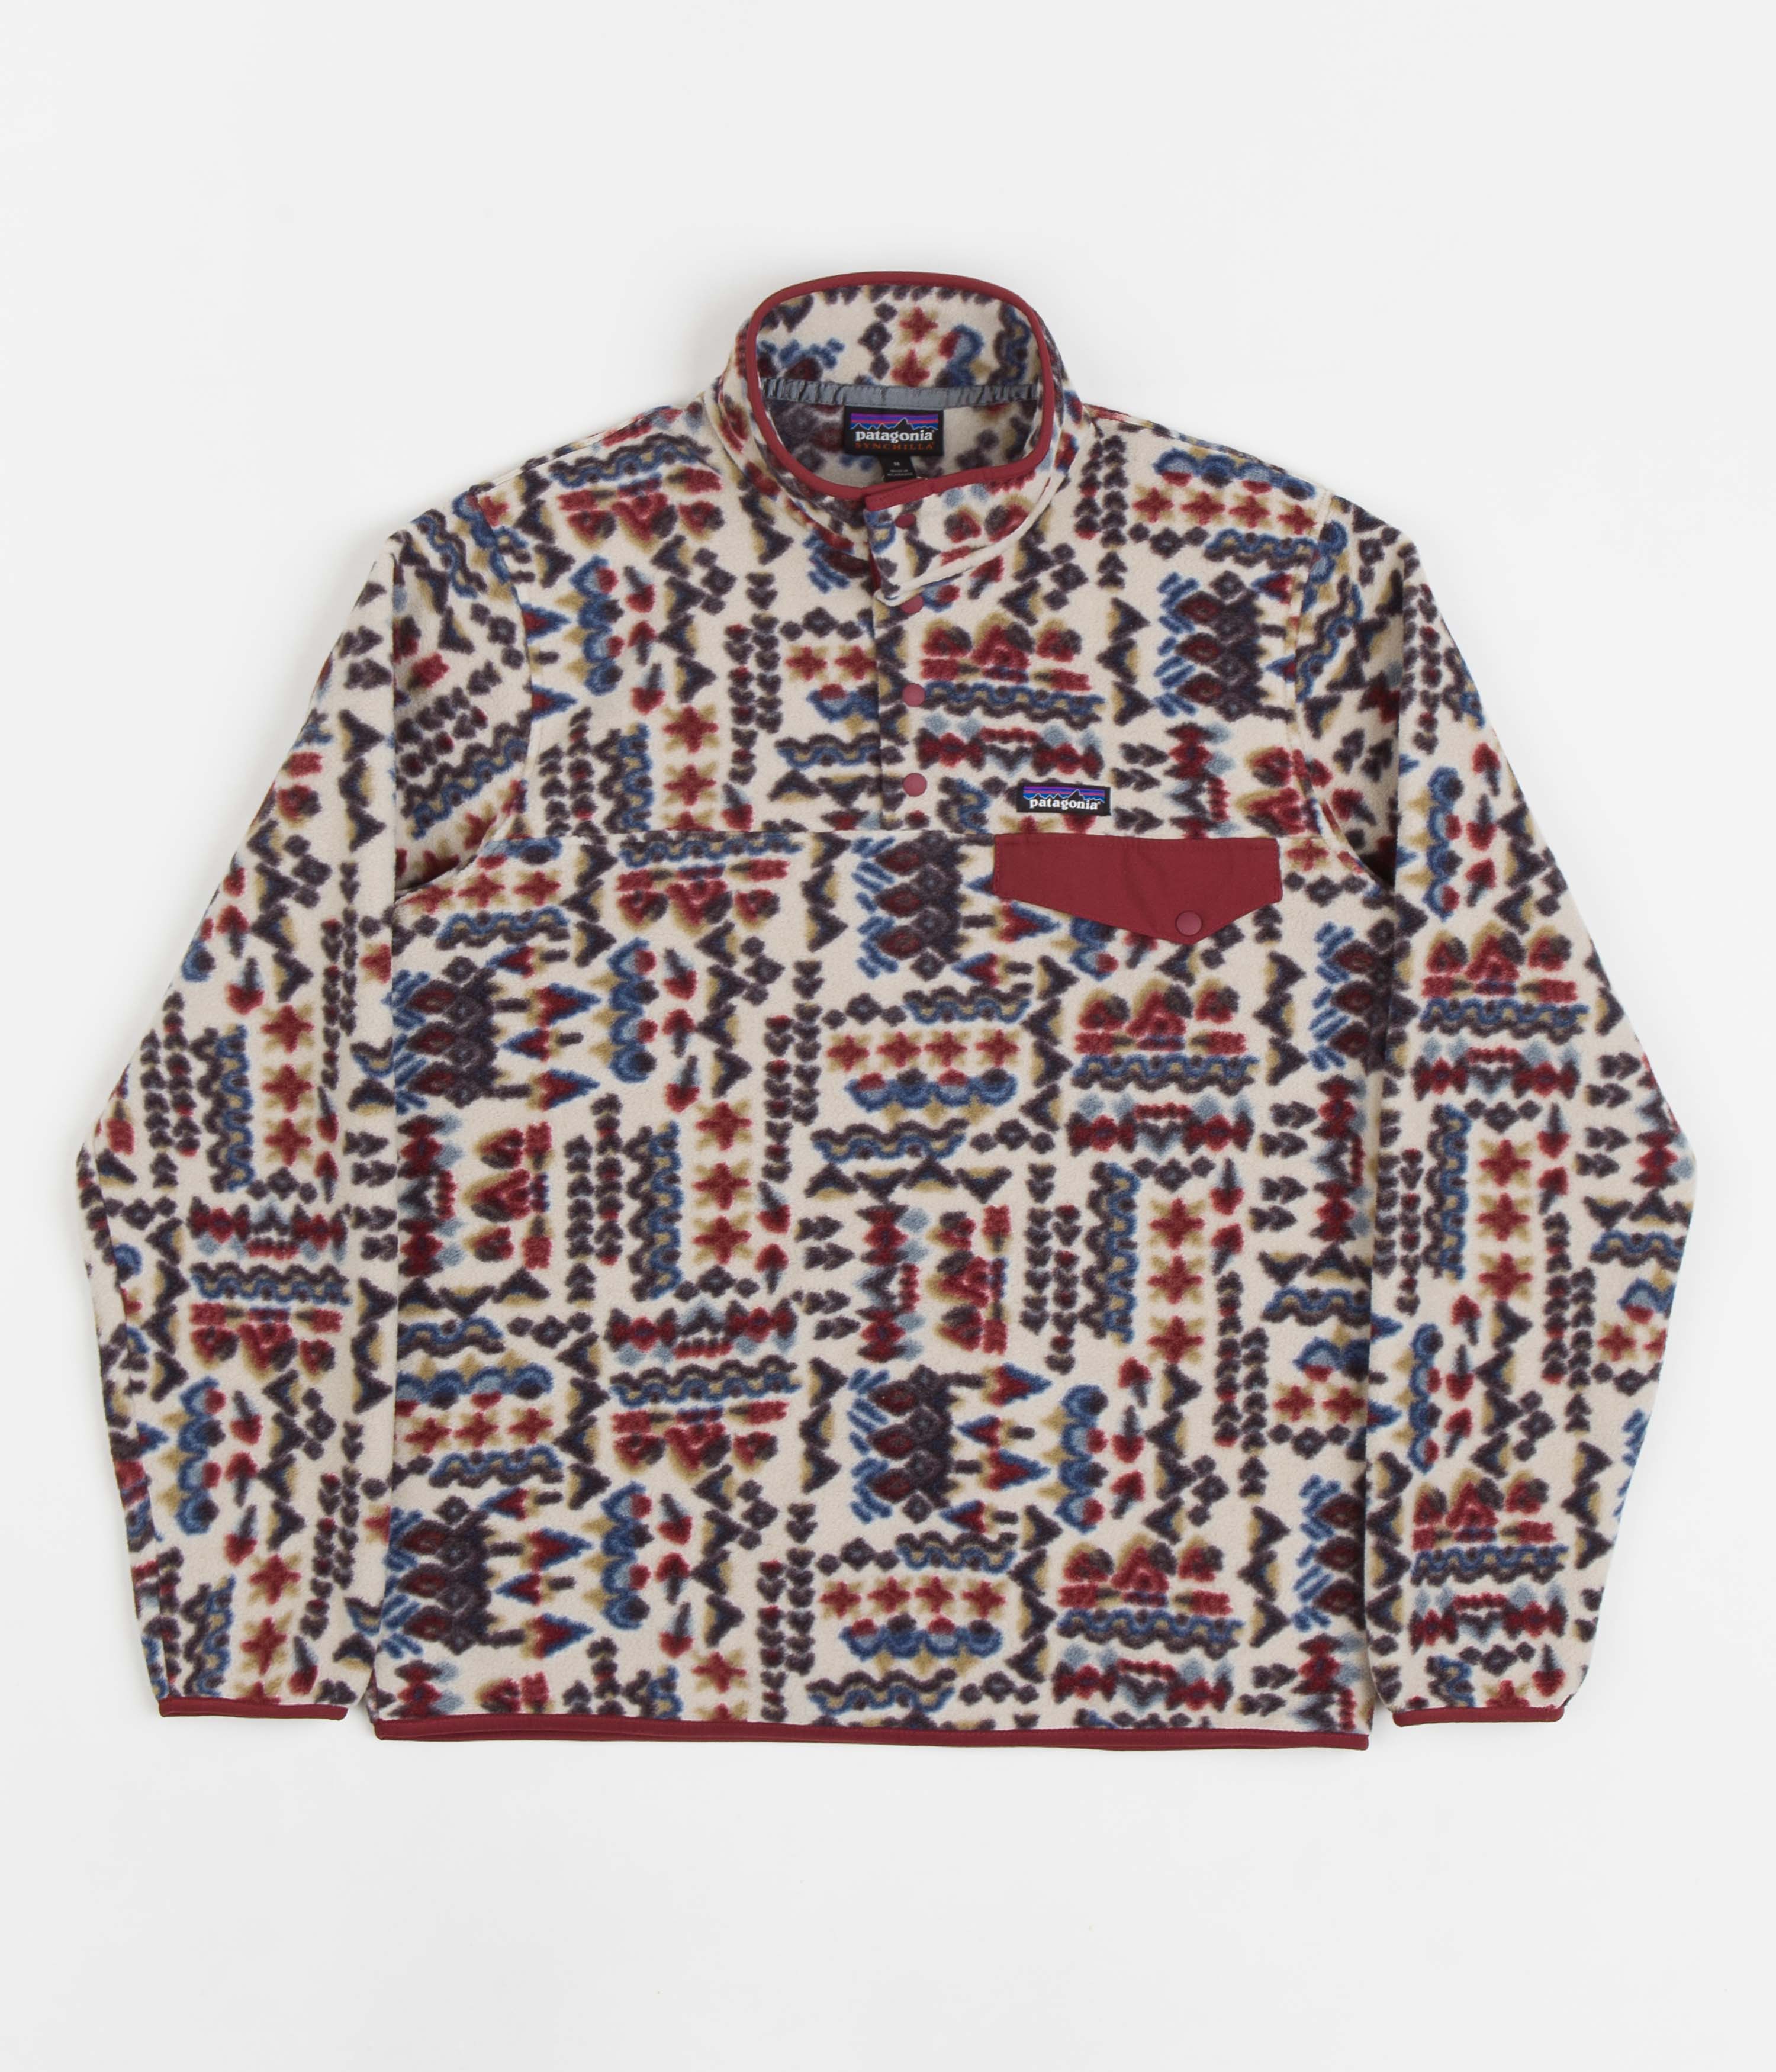 Patagonia Lightweight Synchilla Snap-T Fleece - Fitz Roy Patchwork